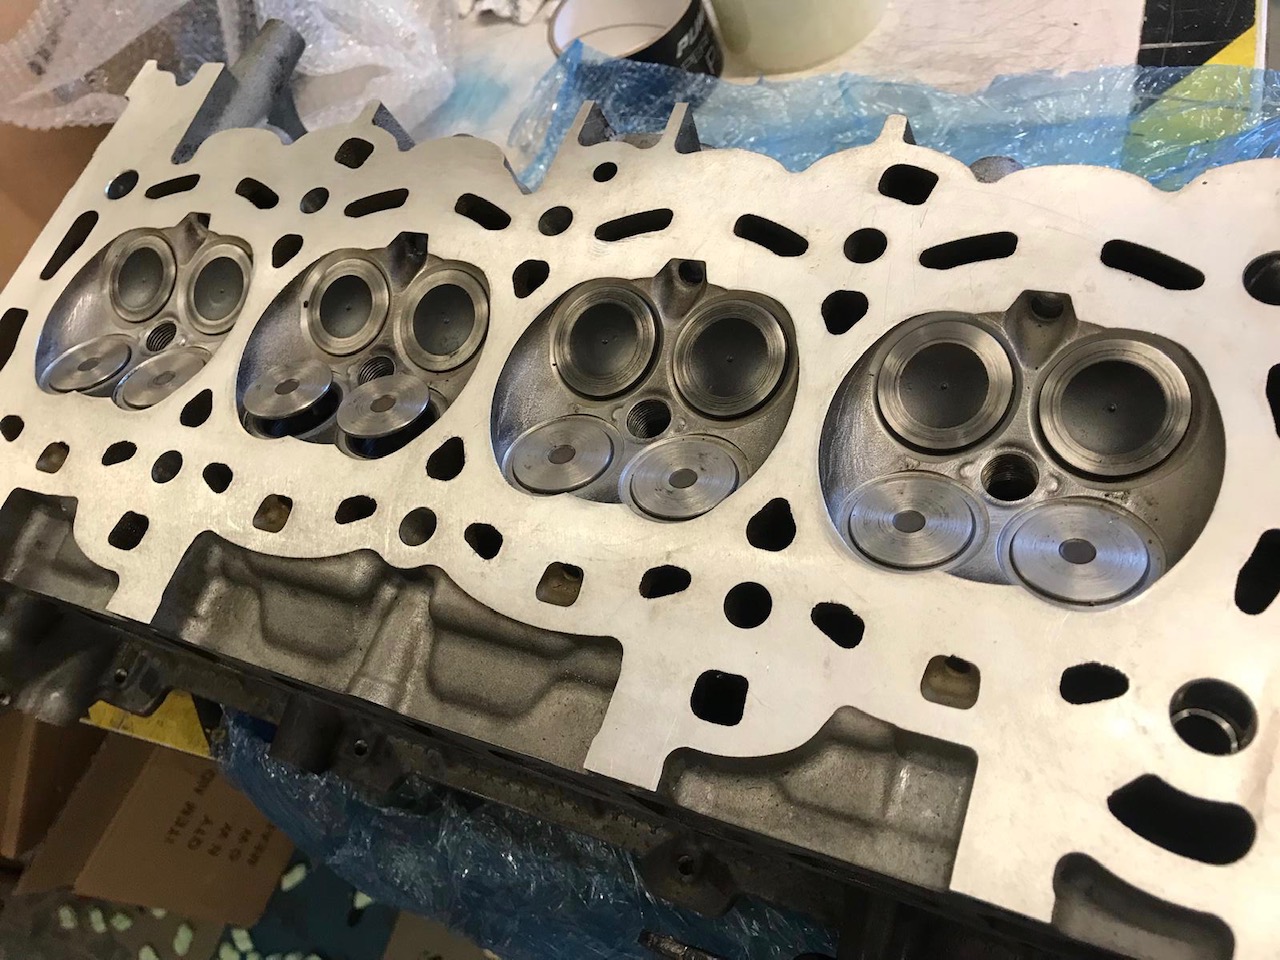 Ford 2 0l Ecoboost Cylinder Head Individual Exhaust Ports Focus Mk3 St 250ps Engine Used Engines Pumaspeed Milltek Ford Performance Tuning Milltek Sport Exhaust Ford Fiesta Focus St Rs Parts Specialist